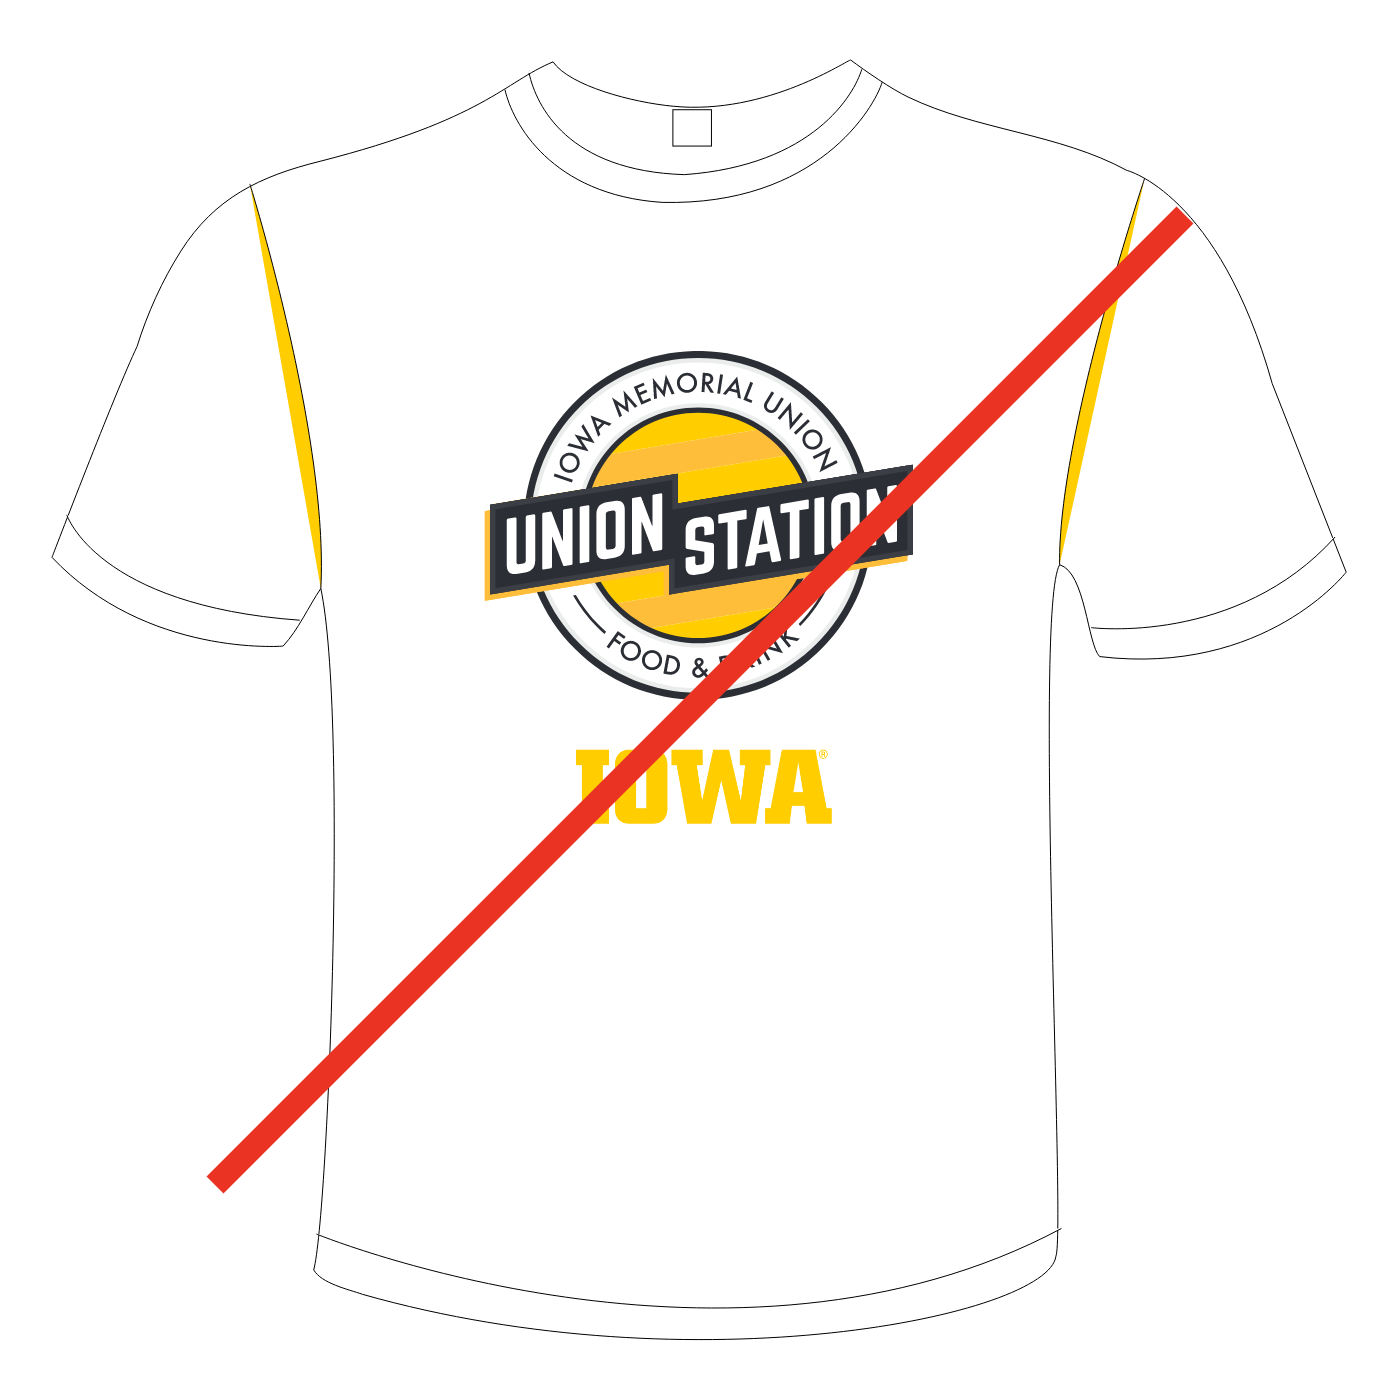 Union Station graphic on front of tee with block IOWA too close